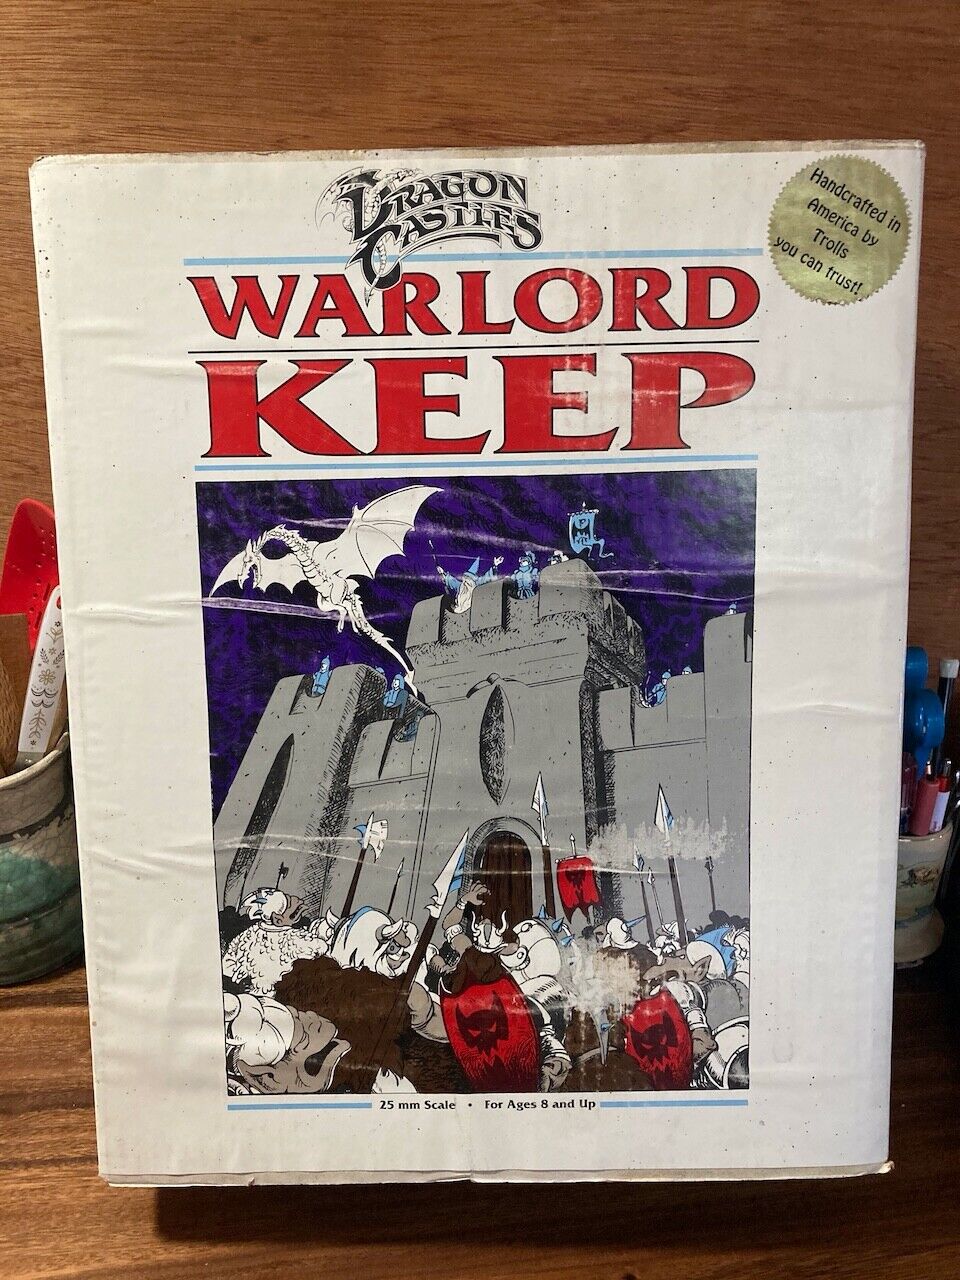 DRAGON CASTLES WARLORD KEEP  NOS  Complete Set with Dwarf Figures  Made in USA